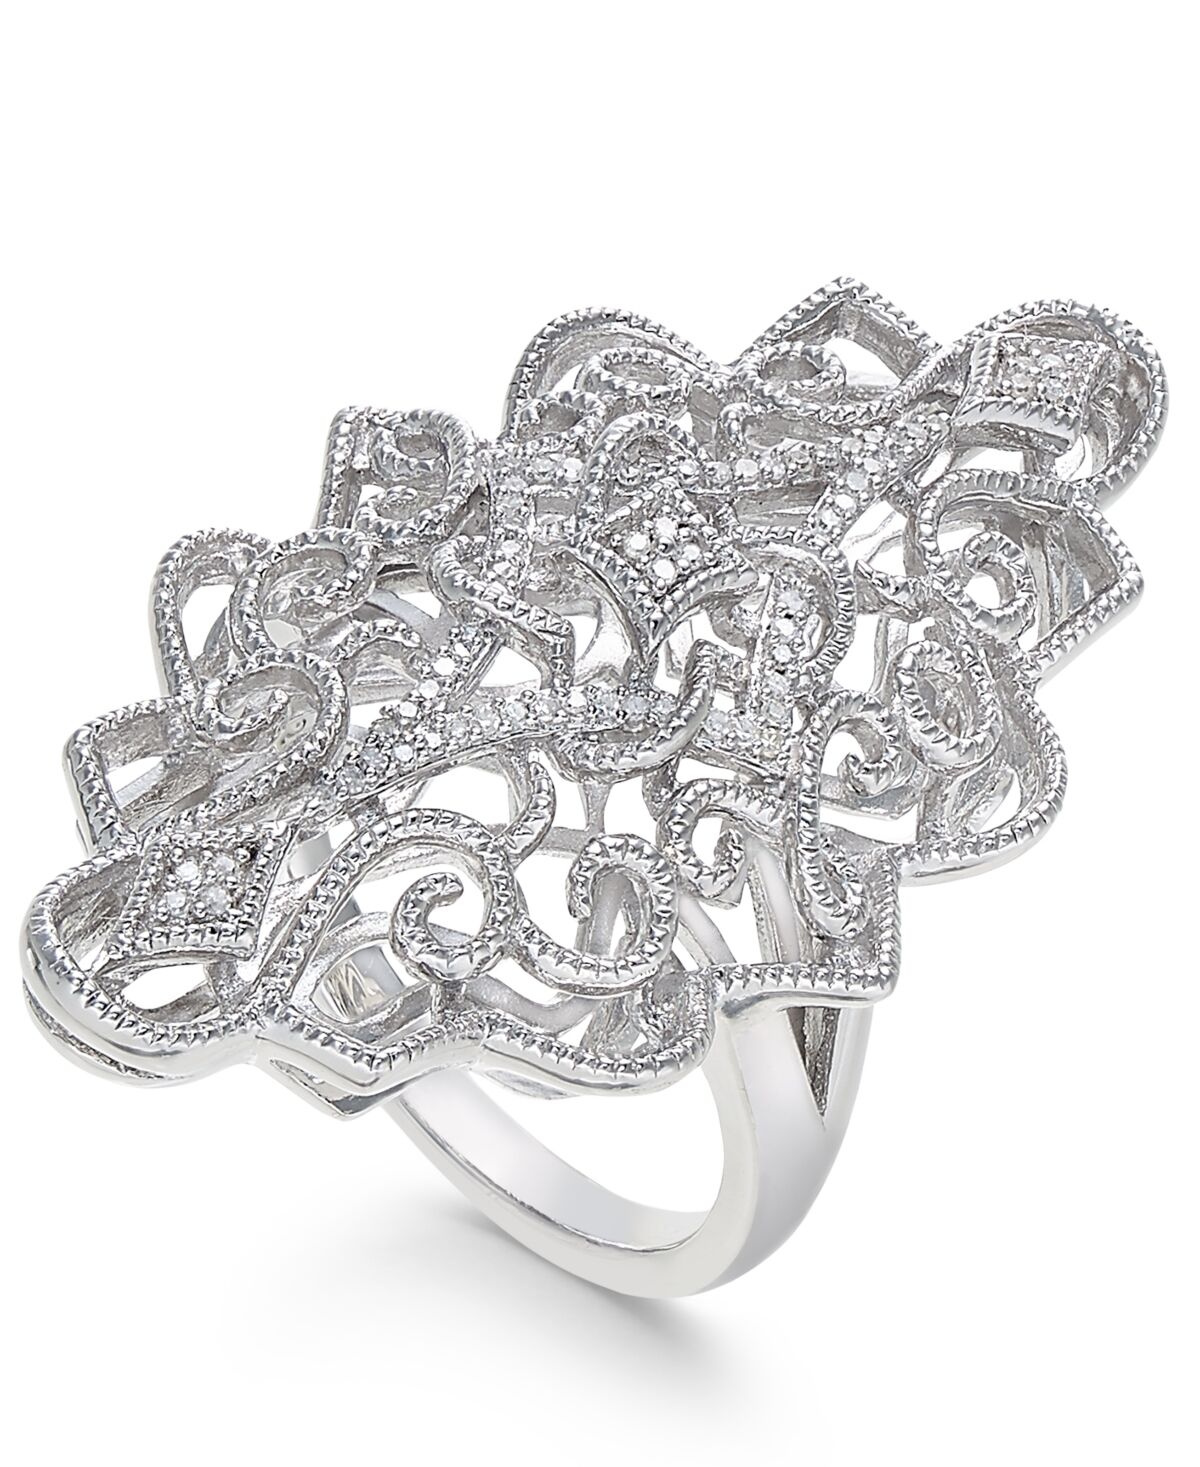 Macy's Diamond Filigree Statement Ring (1/10 ct. t.w.) in Sterling Silver - Sterling Silver